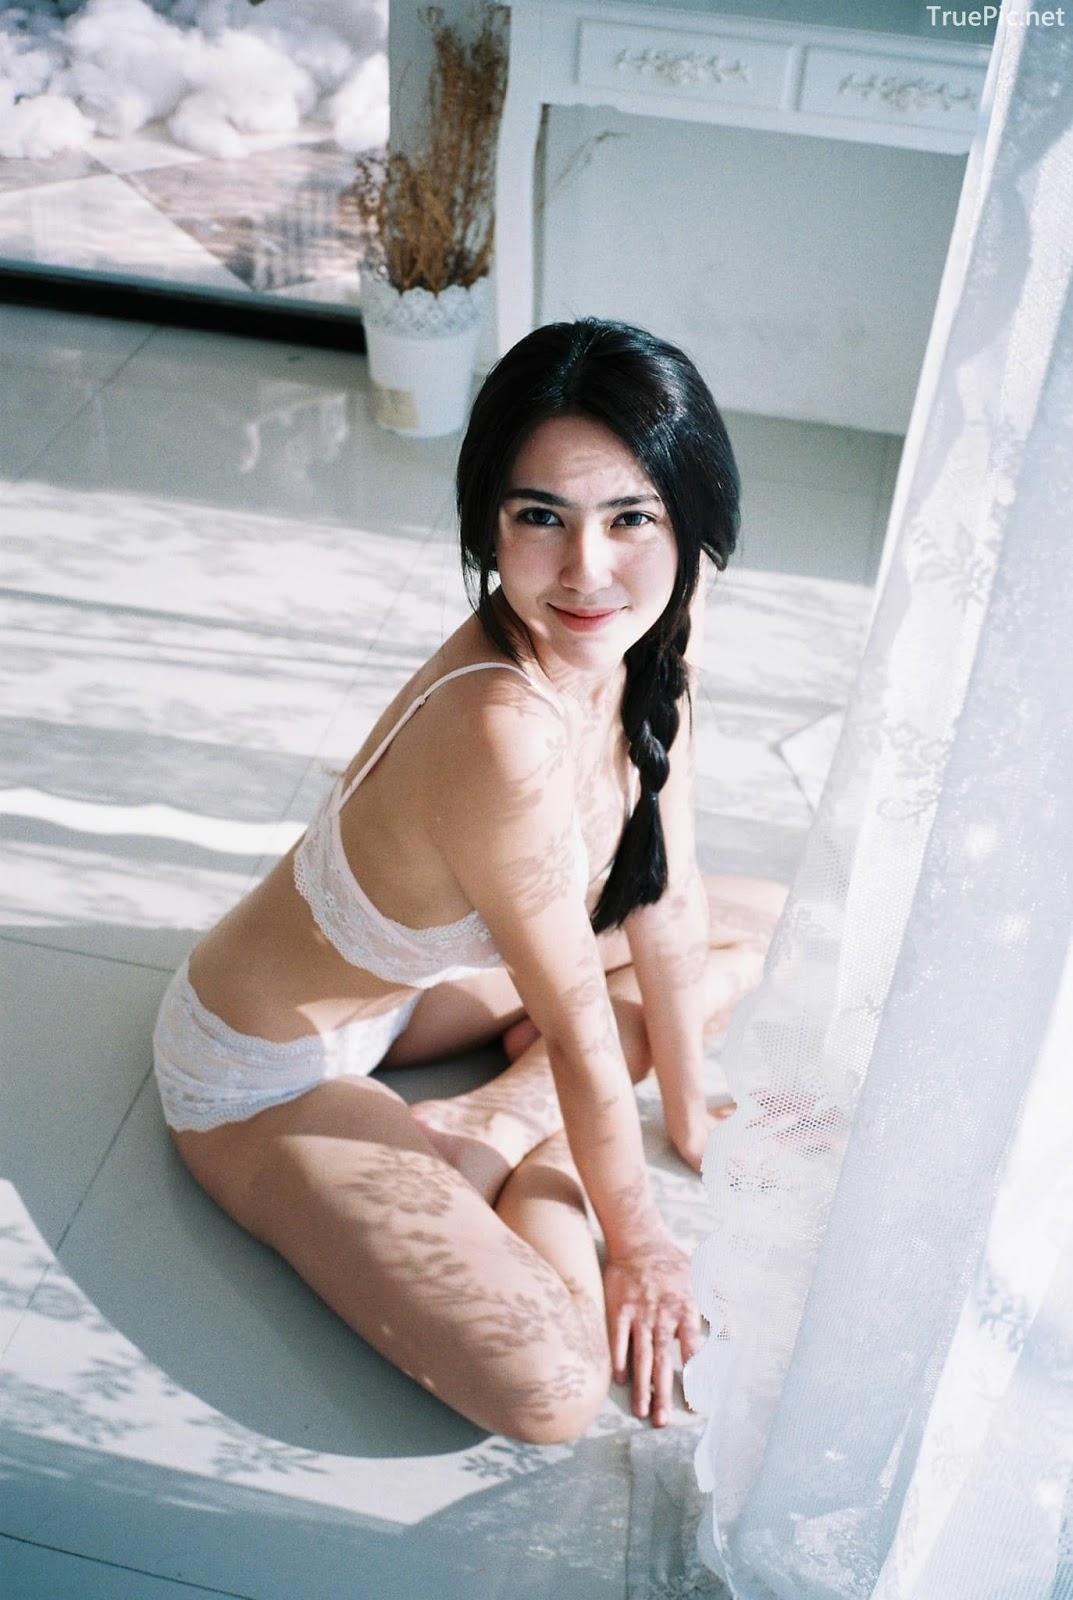 Thailand Hot model - Baifern Rinrucha Kamnark - Sexy in Transparent Lace Lingerie - TruePic.net - Picture 26